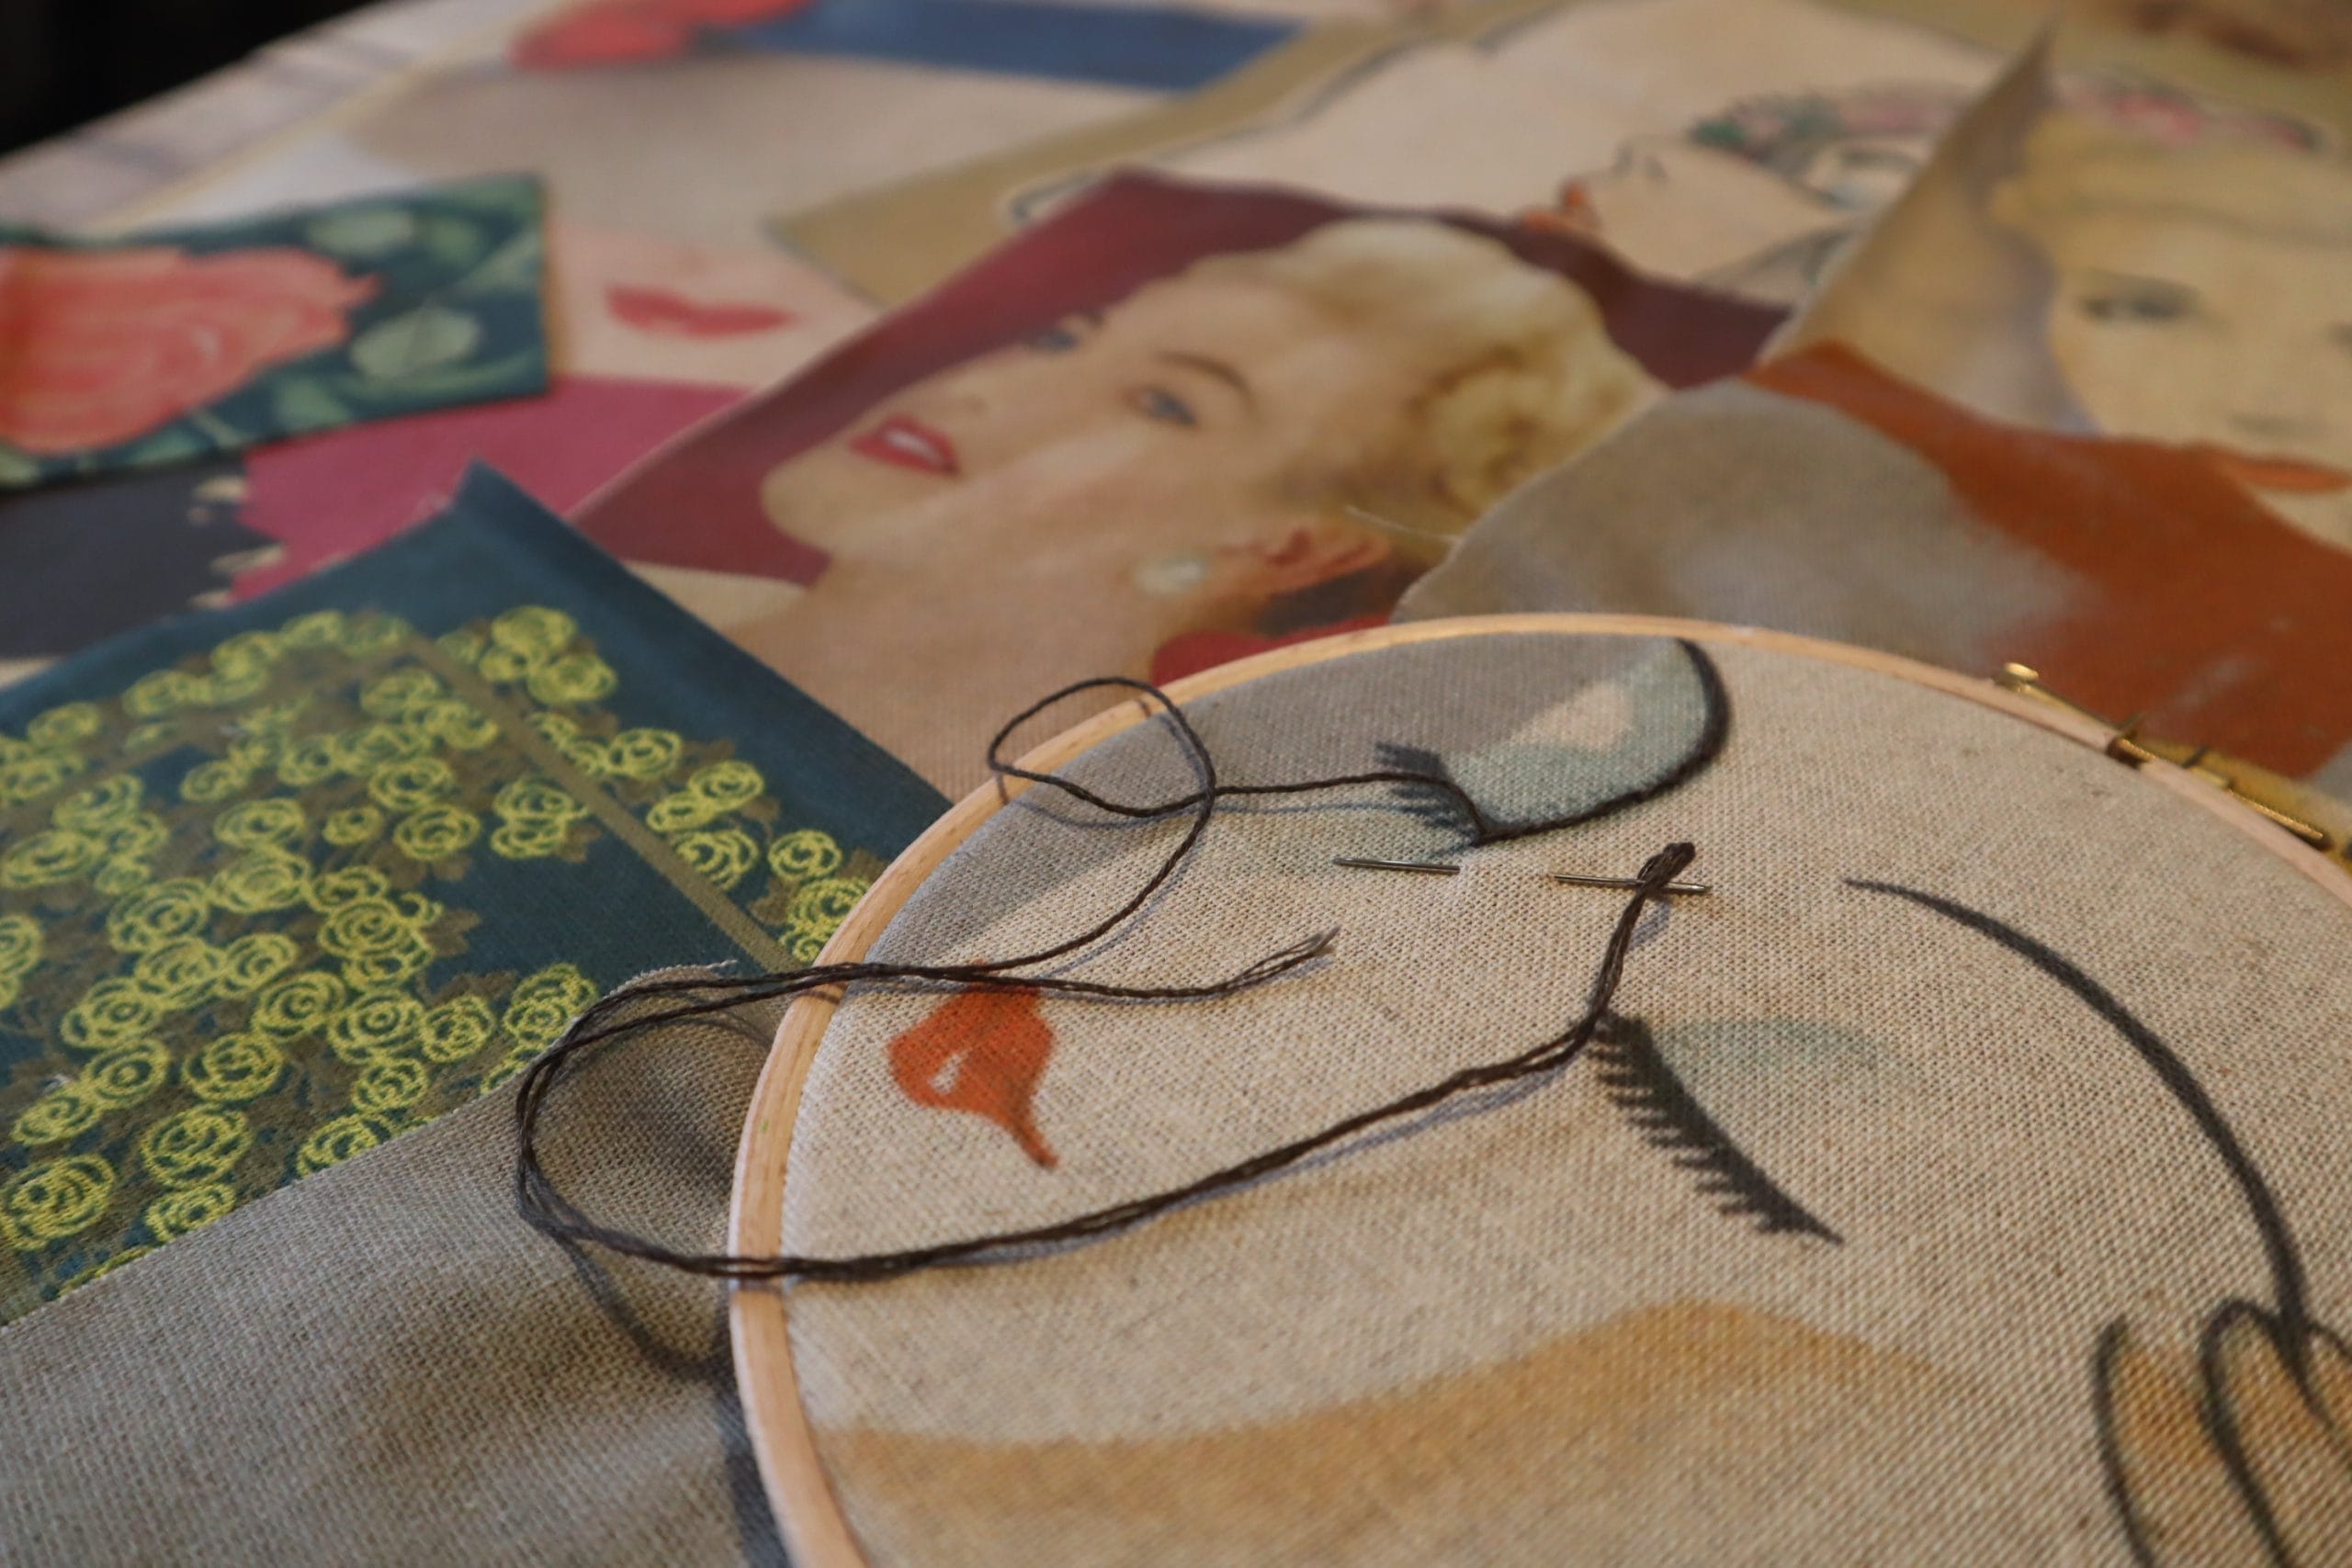 An embroidery hoop, featuring a ladies face, sits on a table surrounded by fabric and pictures.